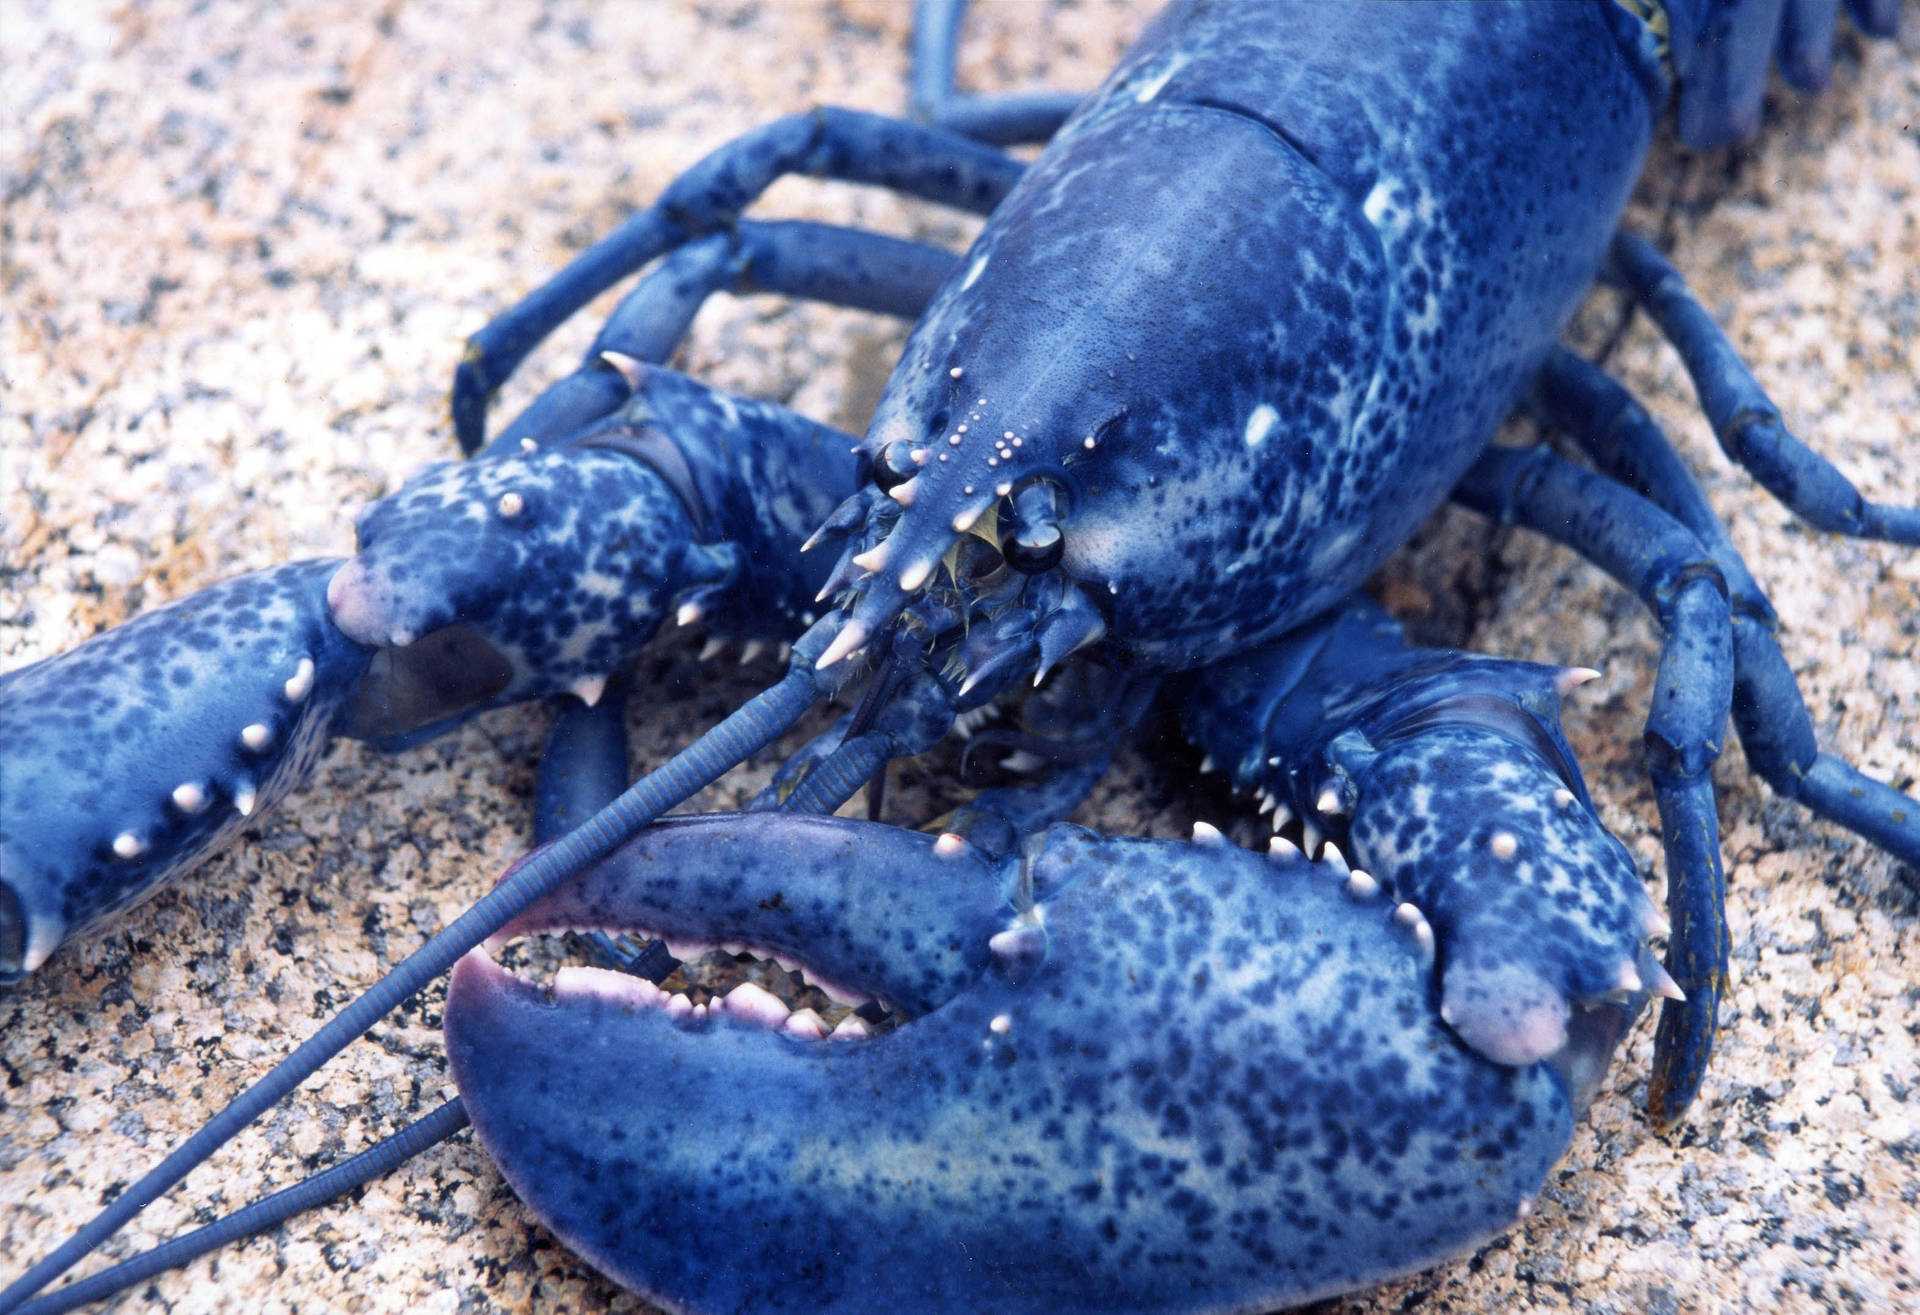 Rare Blue Lobster With Huge Claws Wallpaper